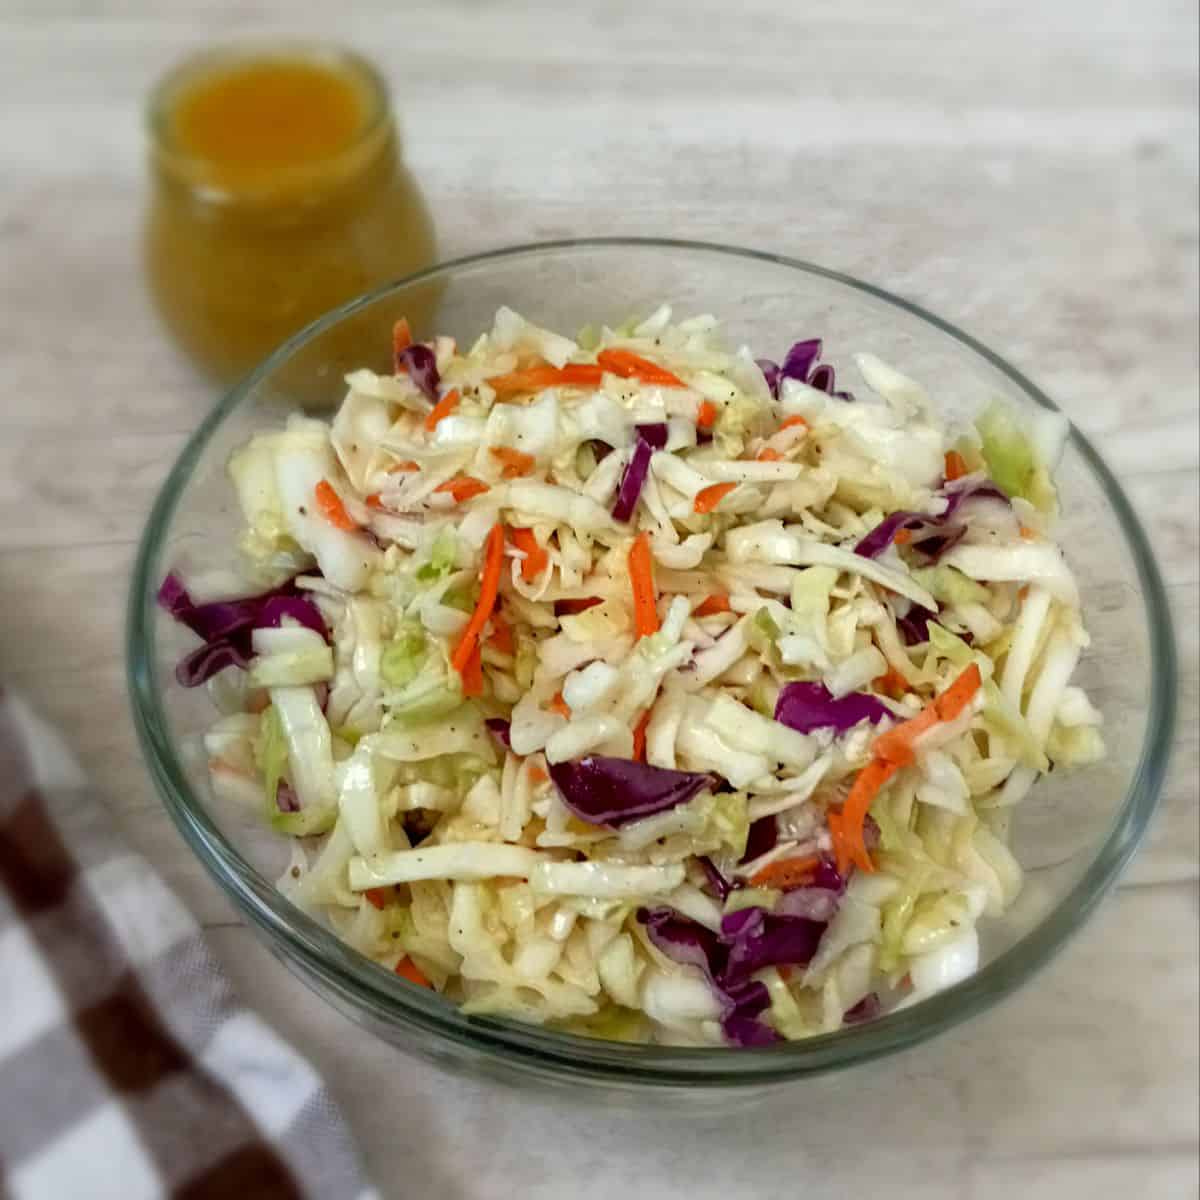 a glass bowl filled with Amish coleslaw and a bottle of dressing.